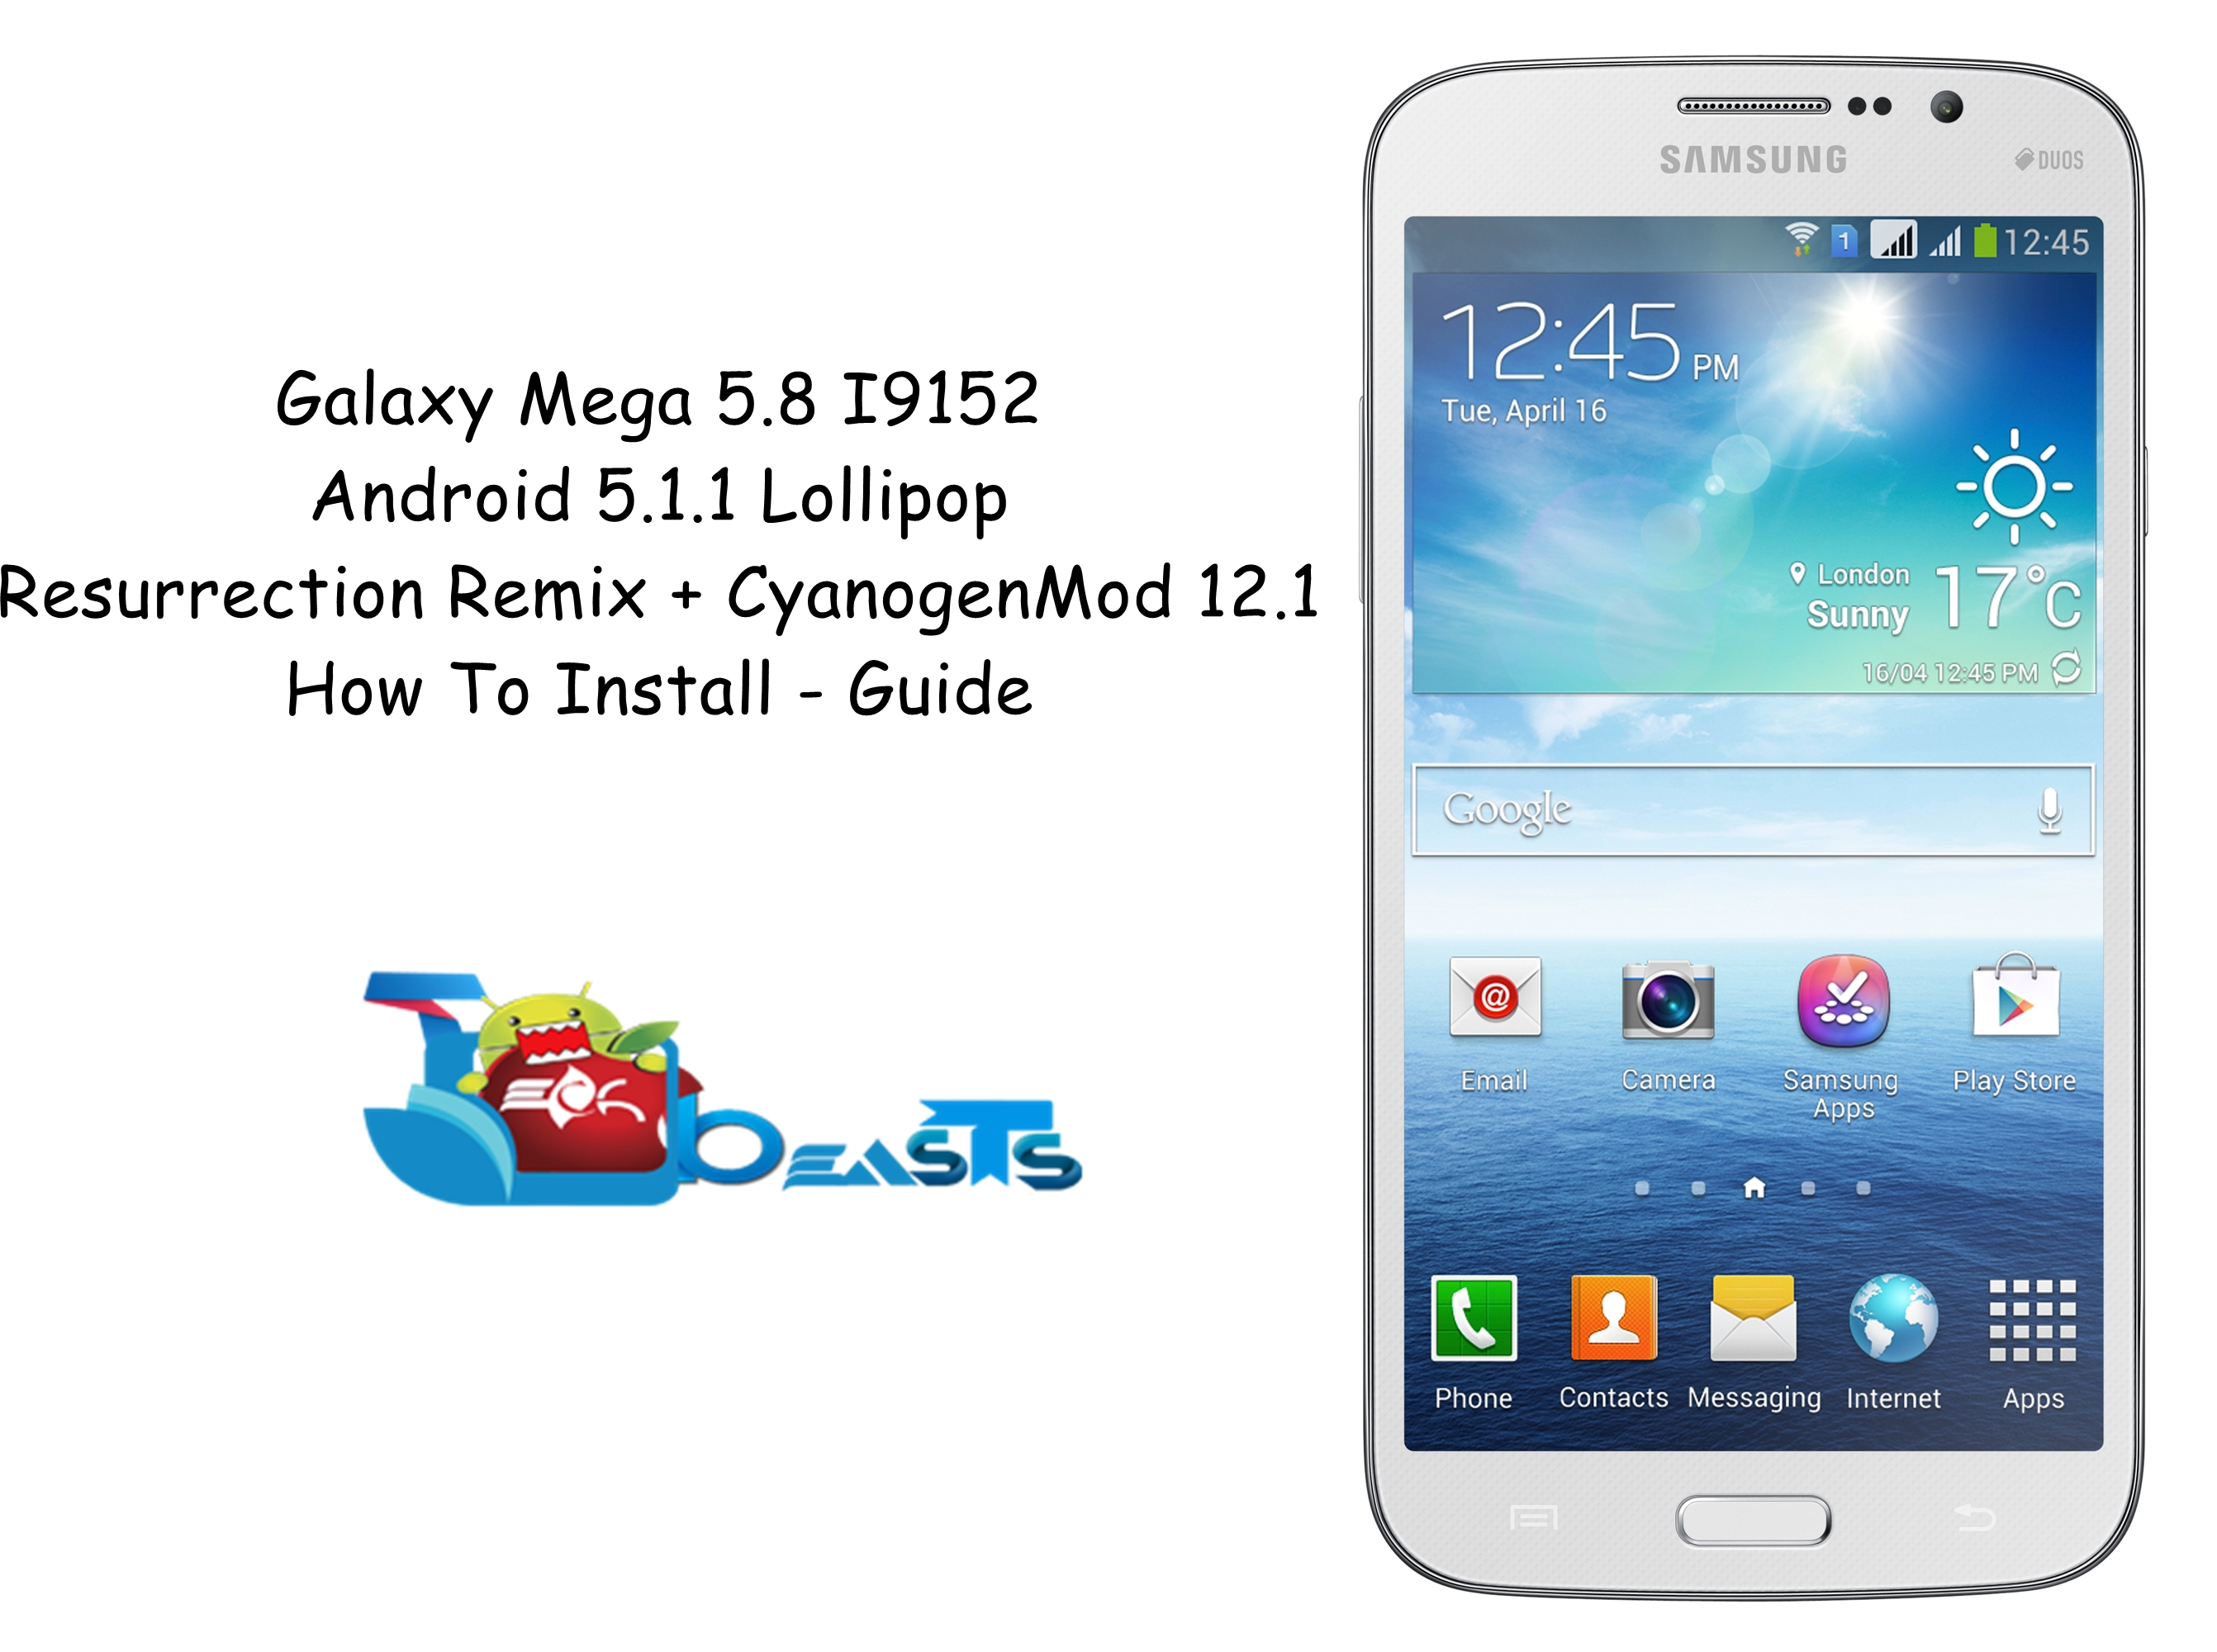 How To Install Android Lollipop 5.1.1 On Galaxy Mega 5.8 I9152 To